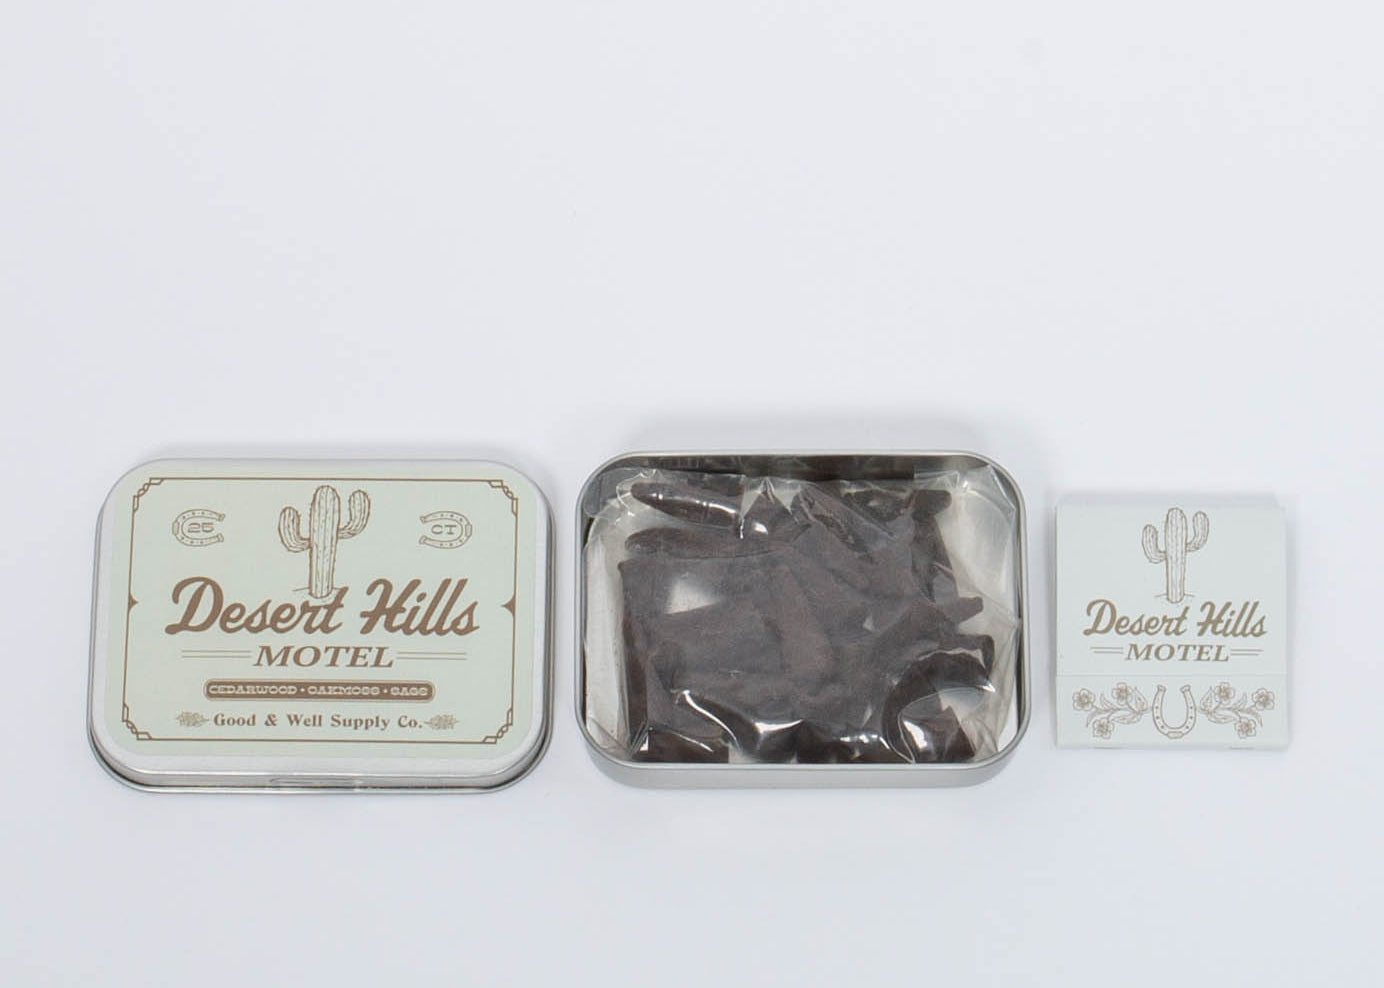 Desert Hills Motel Incense and vintage inspired motel matchbook by Good & Well Supply Co in tan and brown design.